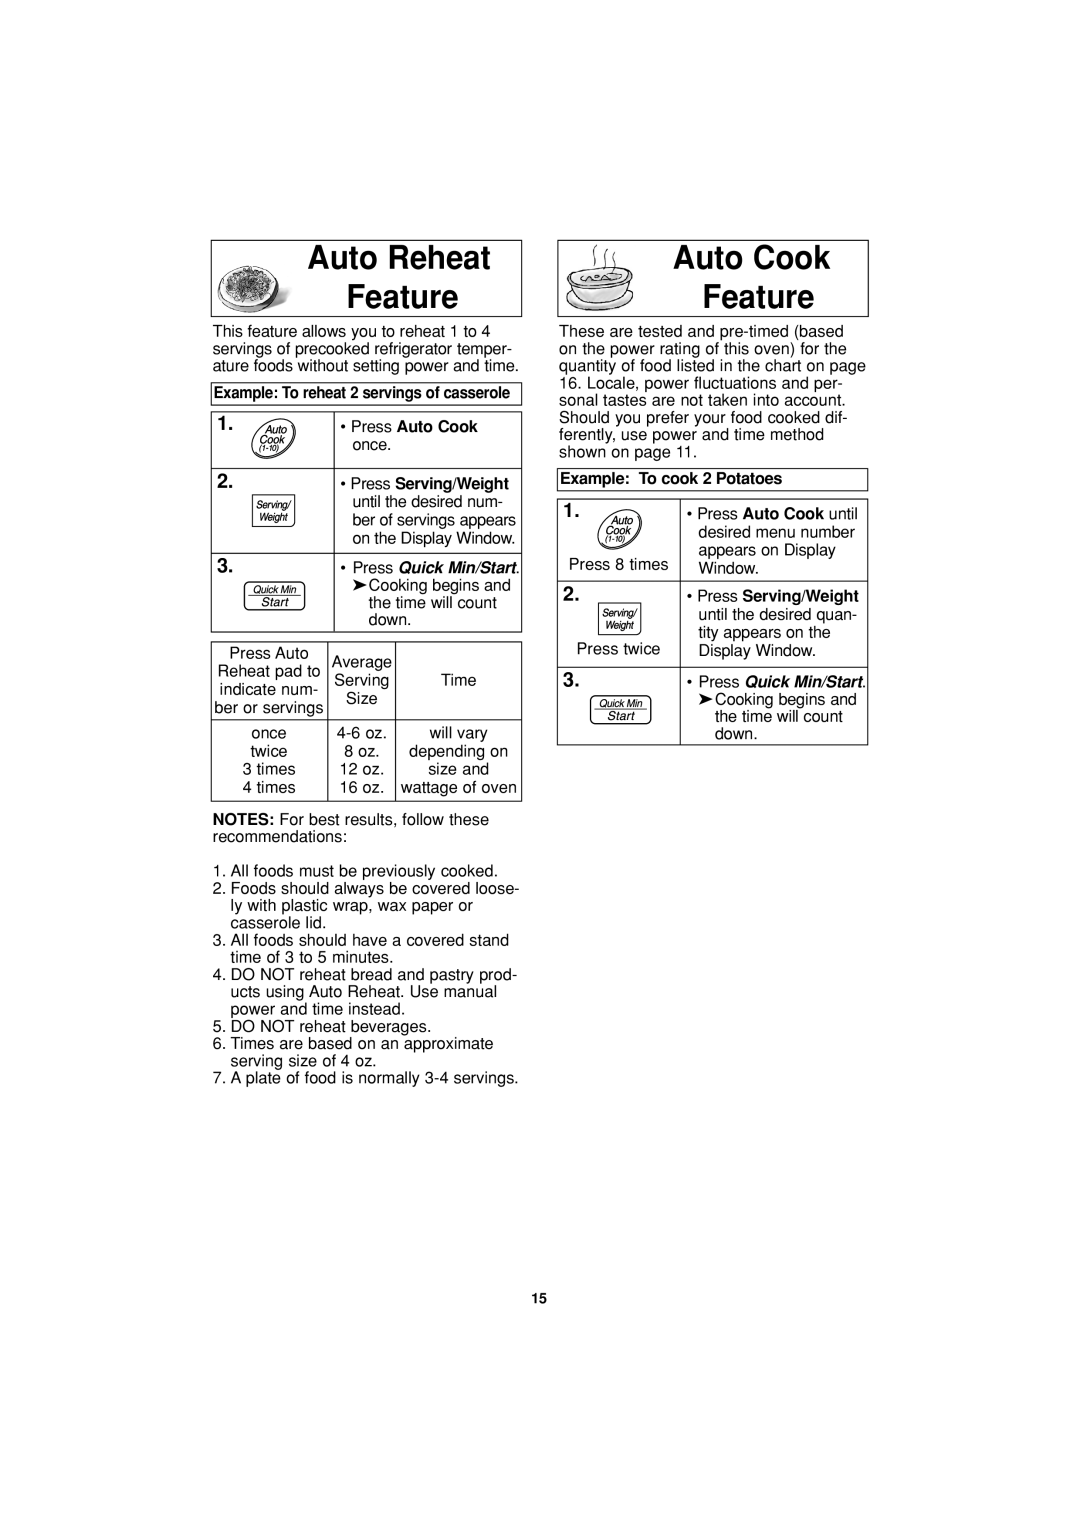 Panasonic NN-S334 Auto Reheat Feature, Auto Cook Feature, Example: To reheat 2 servings of casserole, • Press Auto Cook 